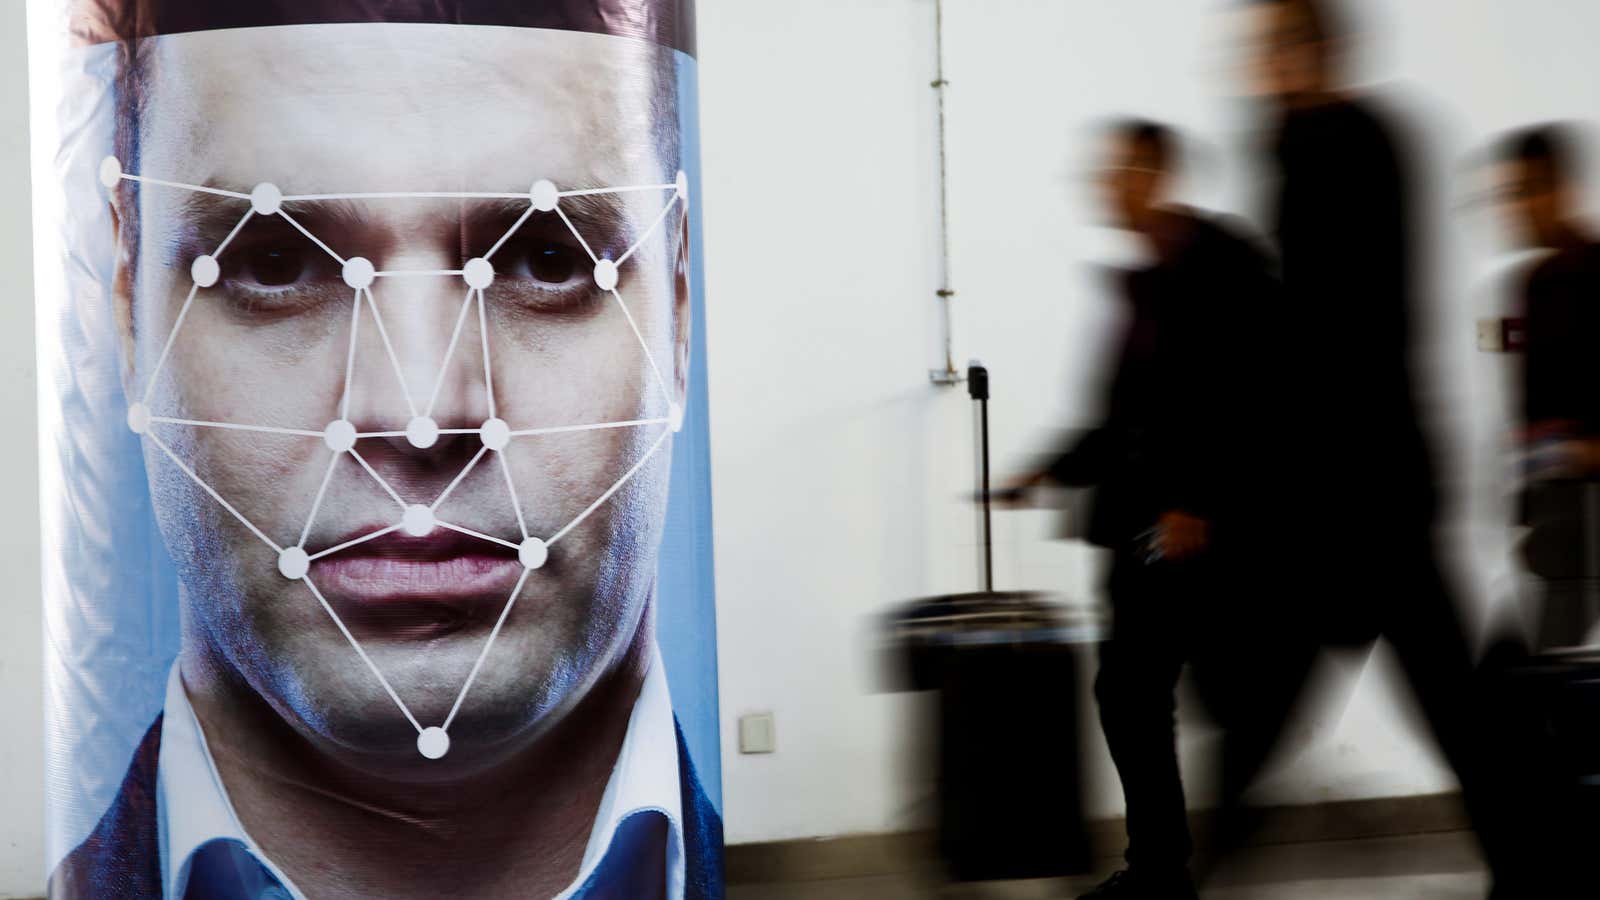 A facial recognition system on display in China.